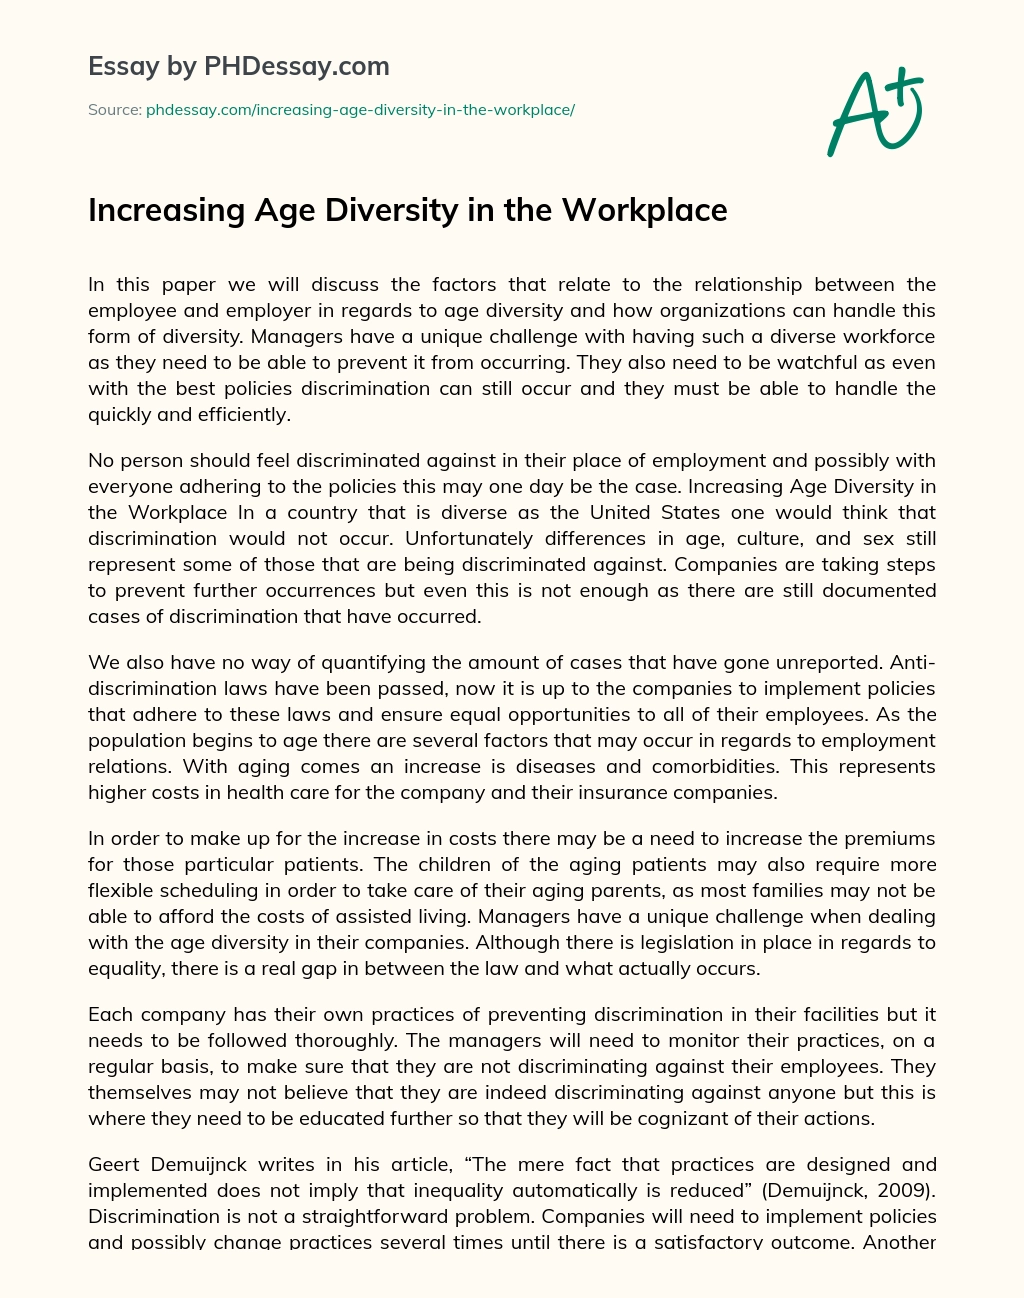 Increasing Age Diversity in the Workplace essay